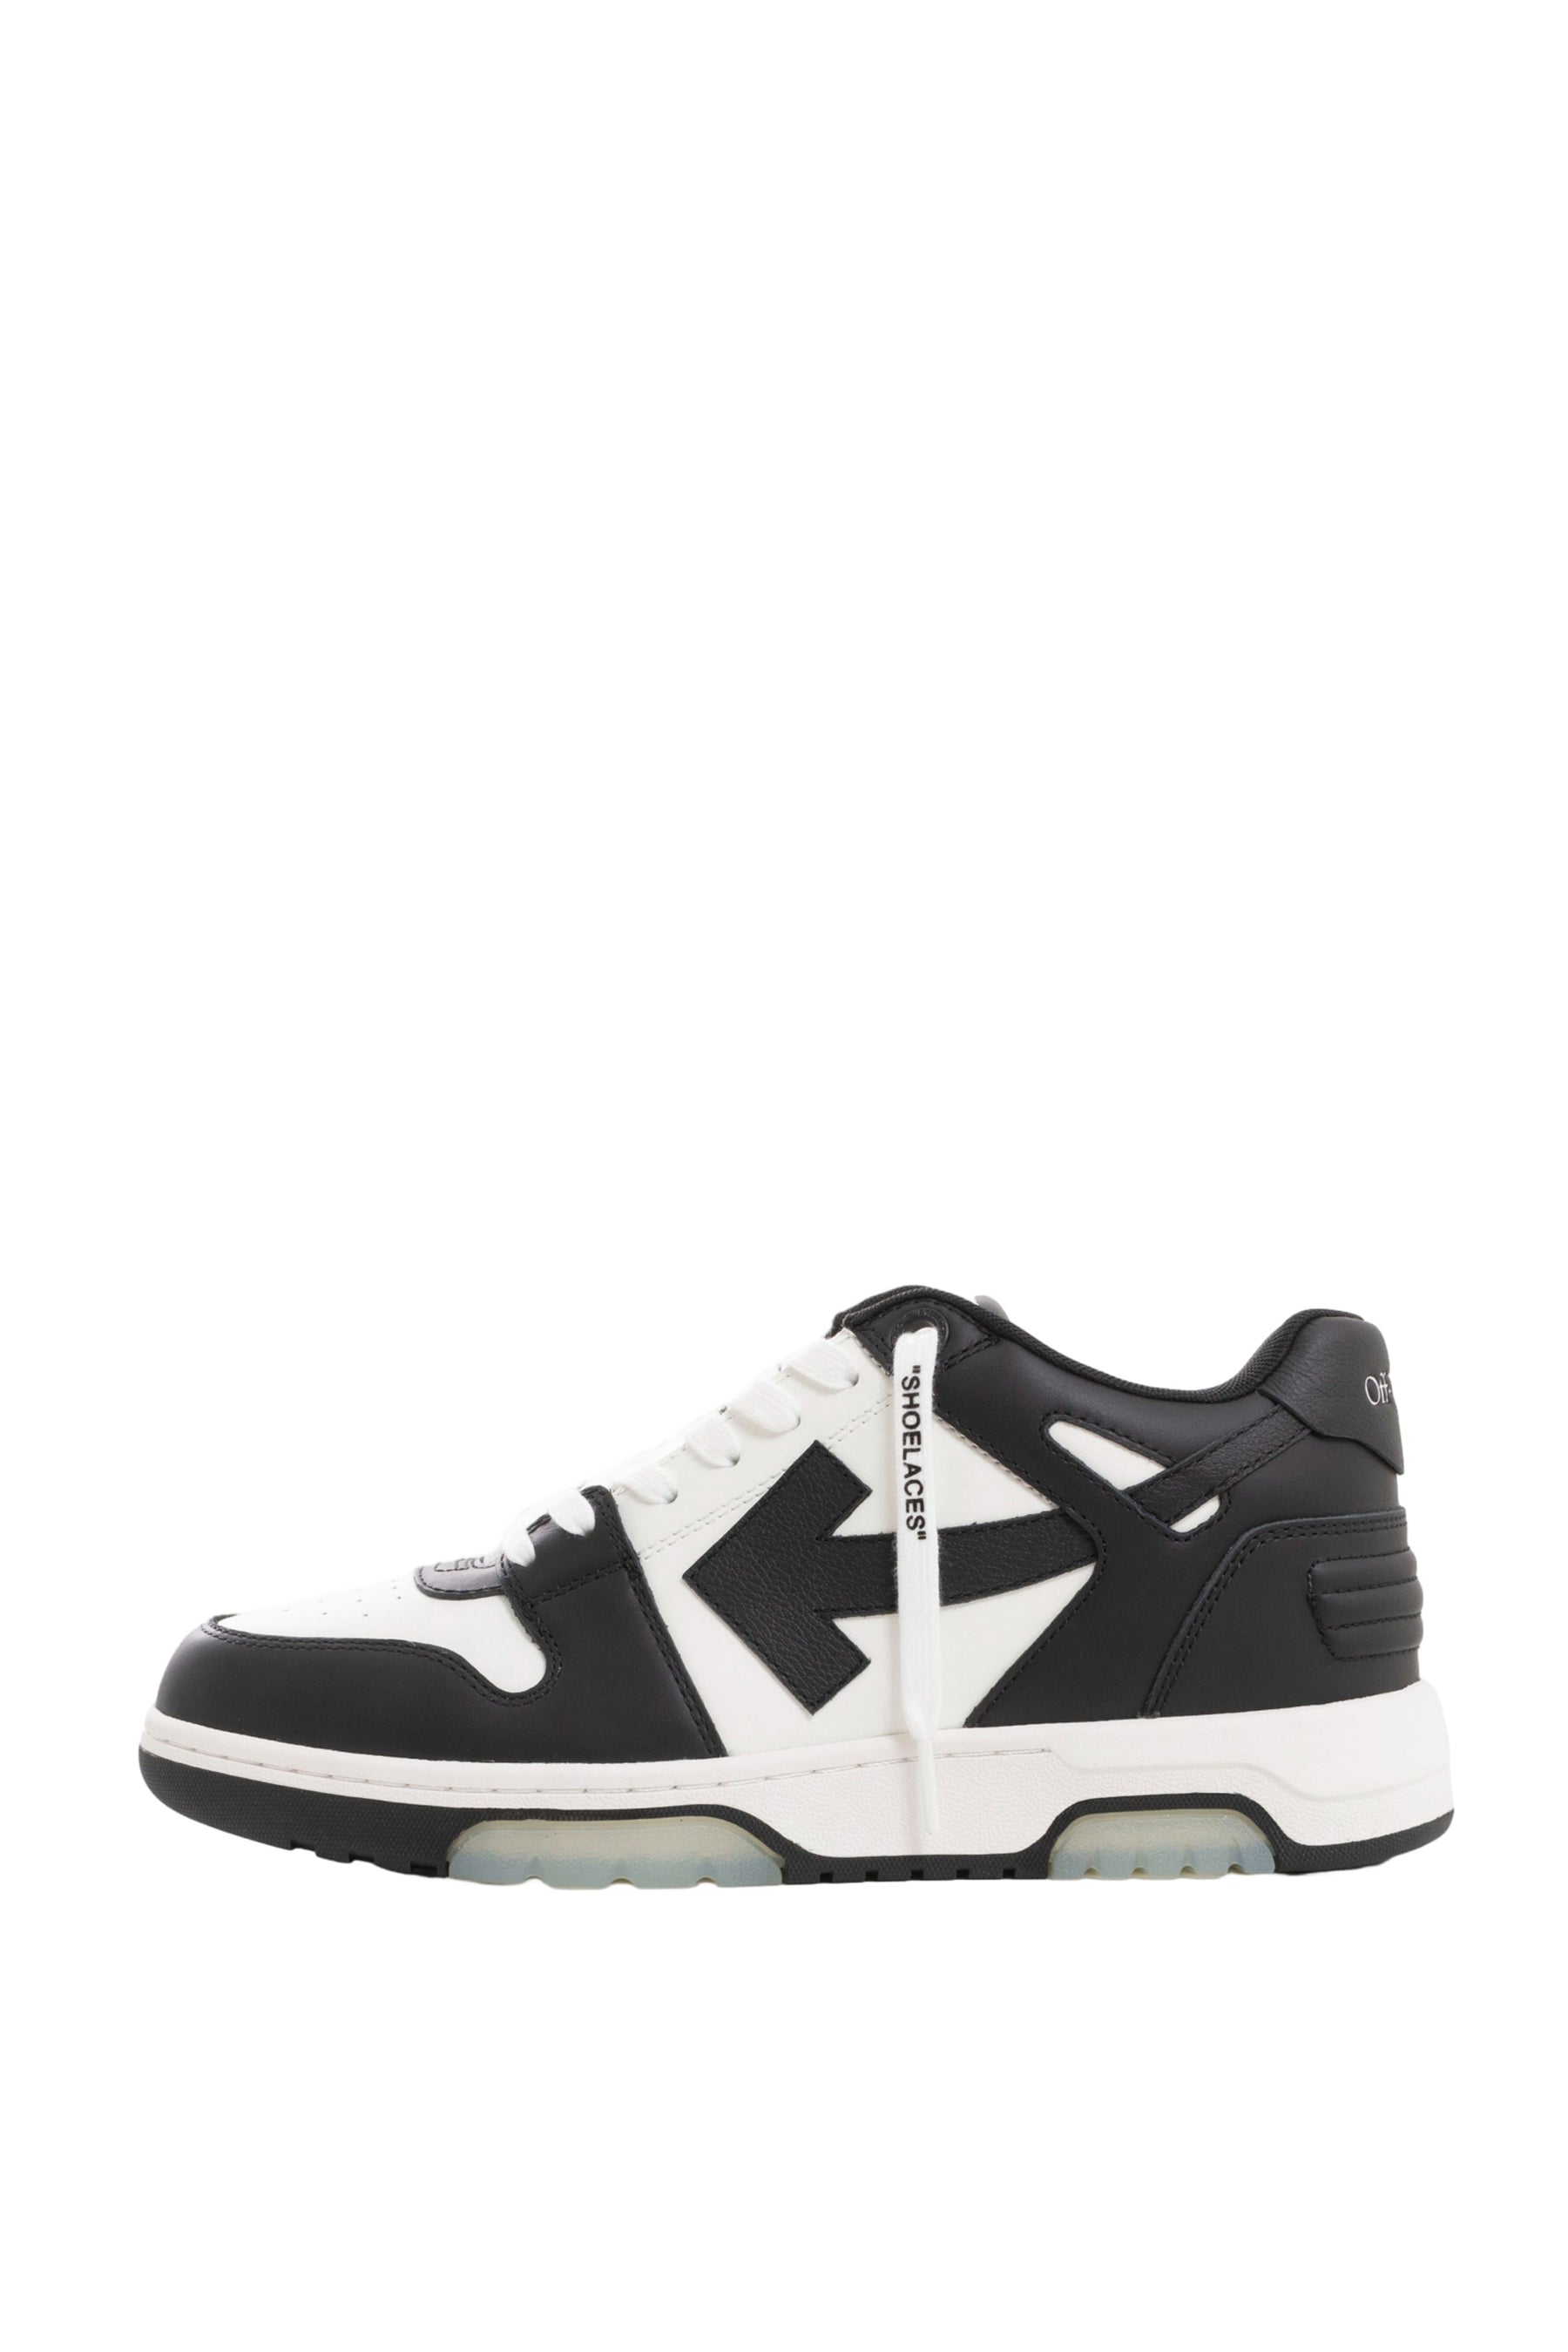 Off-White オフホワイト FW23 OUT OFF OFFICE CALF LEATHER / WHT BLK ...